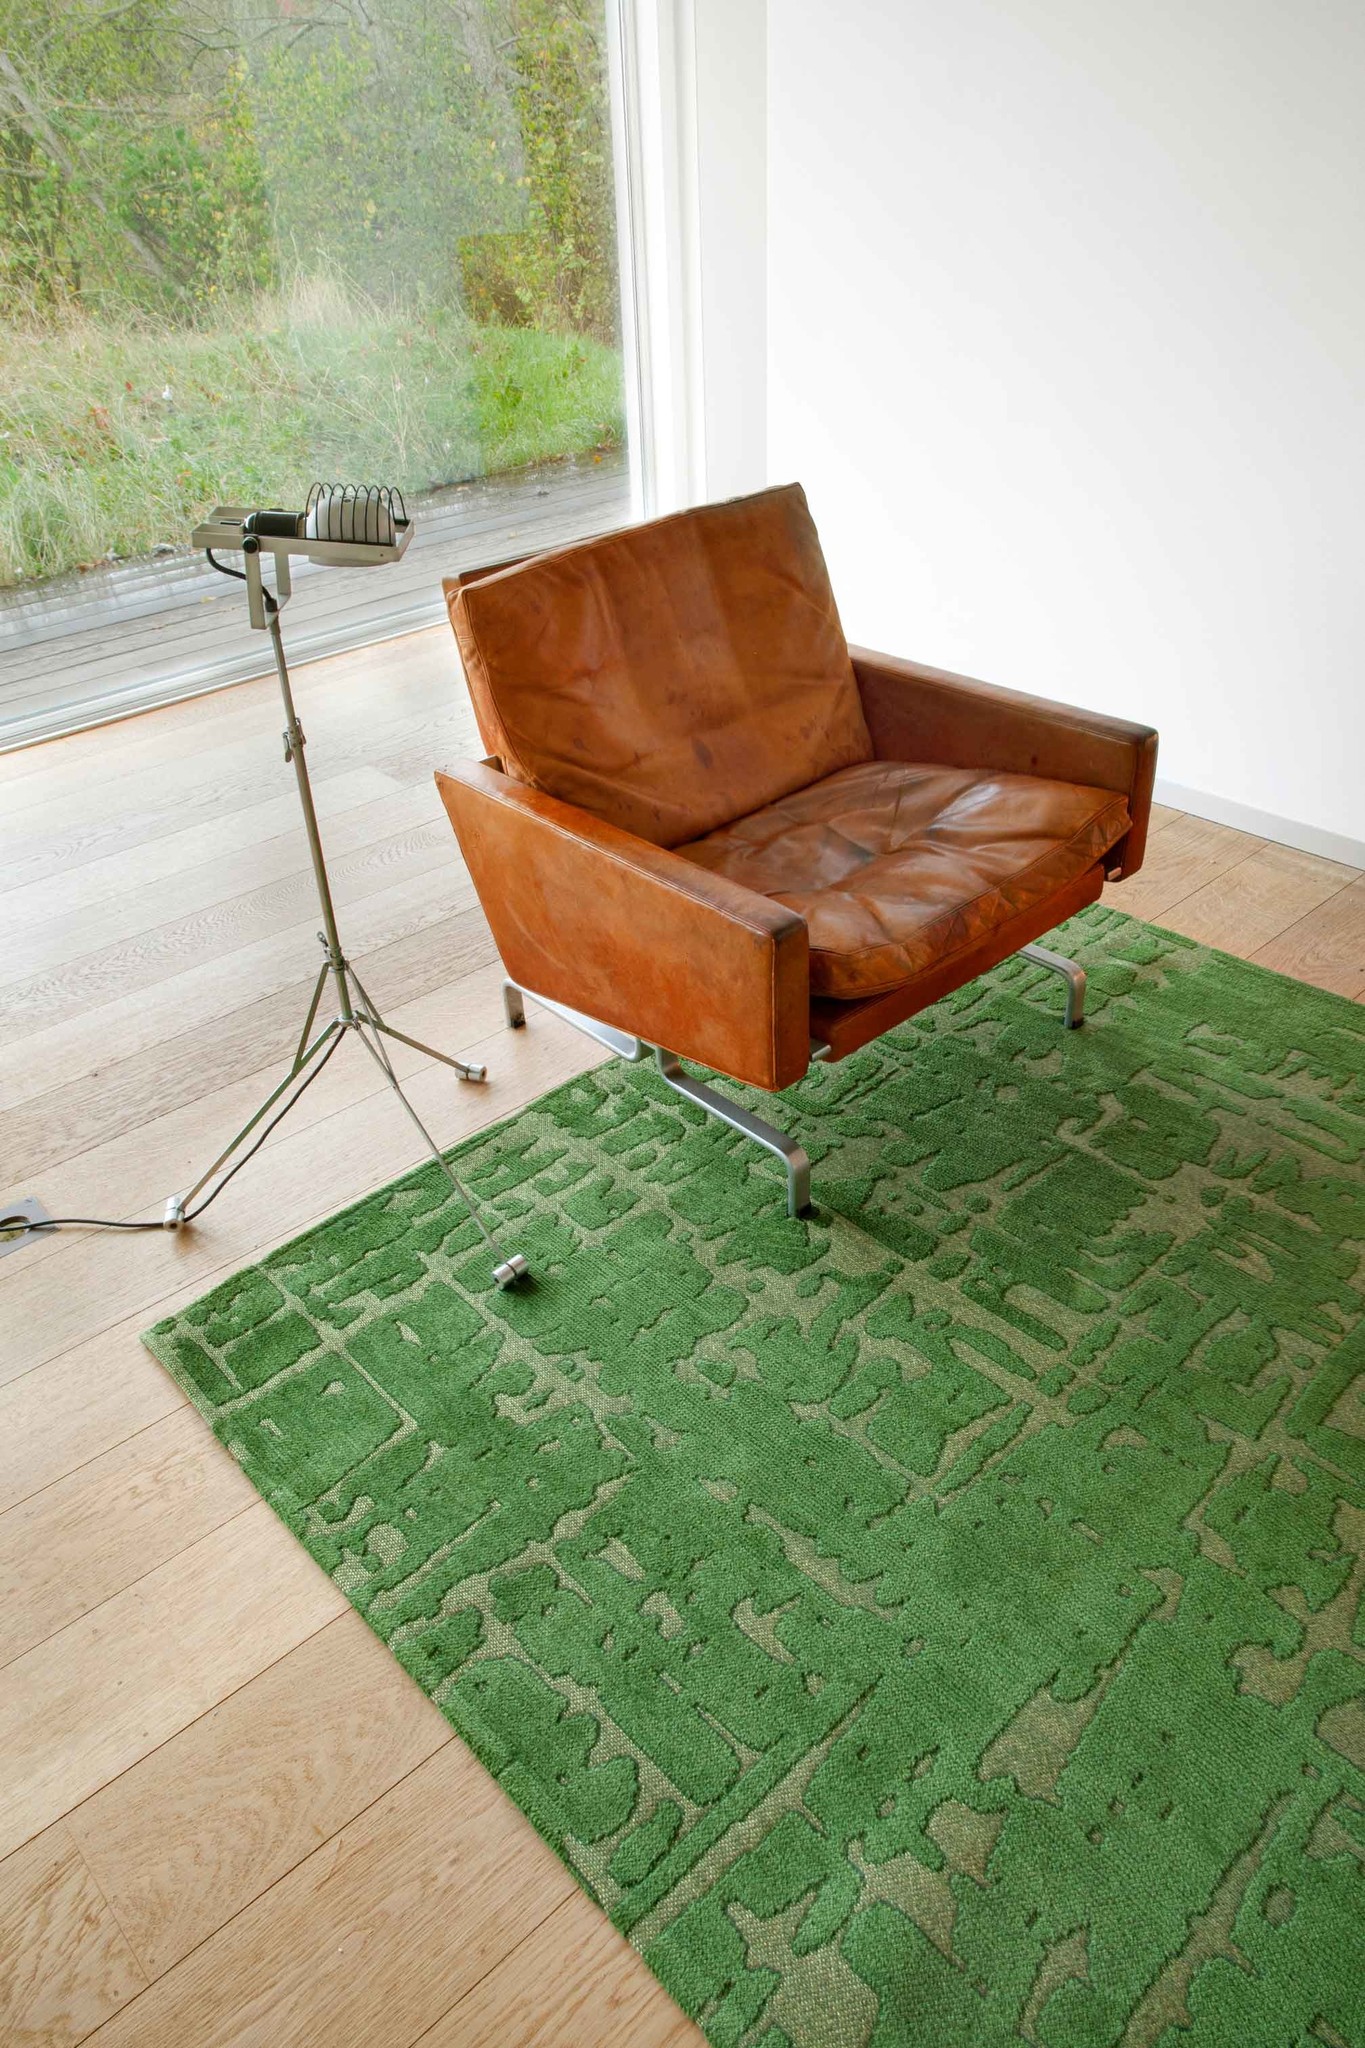 Abstract Green Belgian Rug ☞ Size: 2' 7" x 5' (80 x 150 cm)